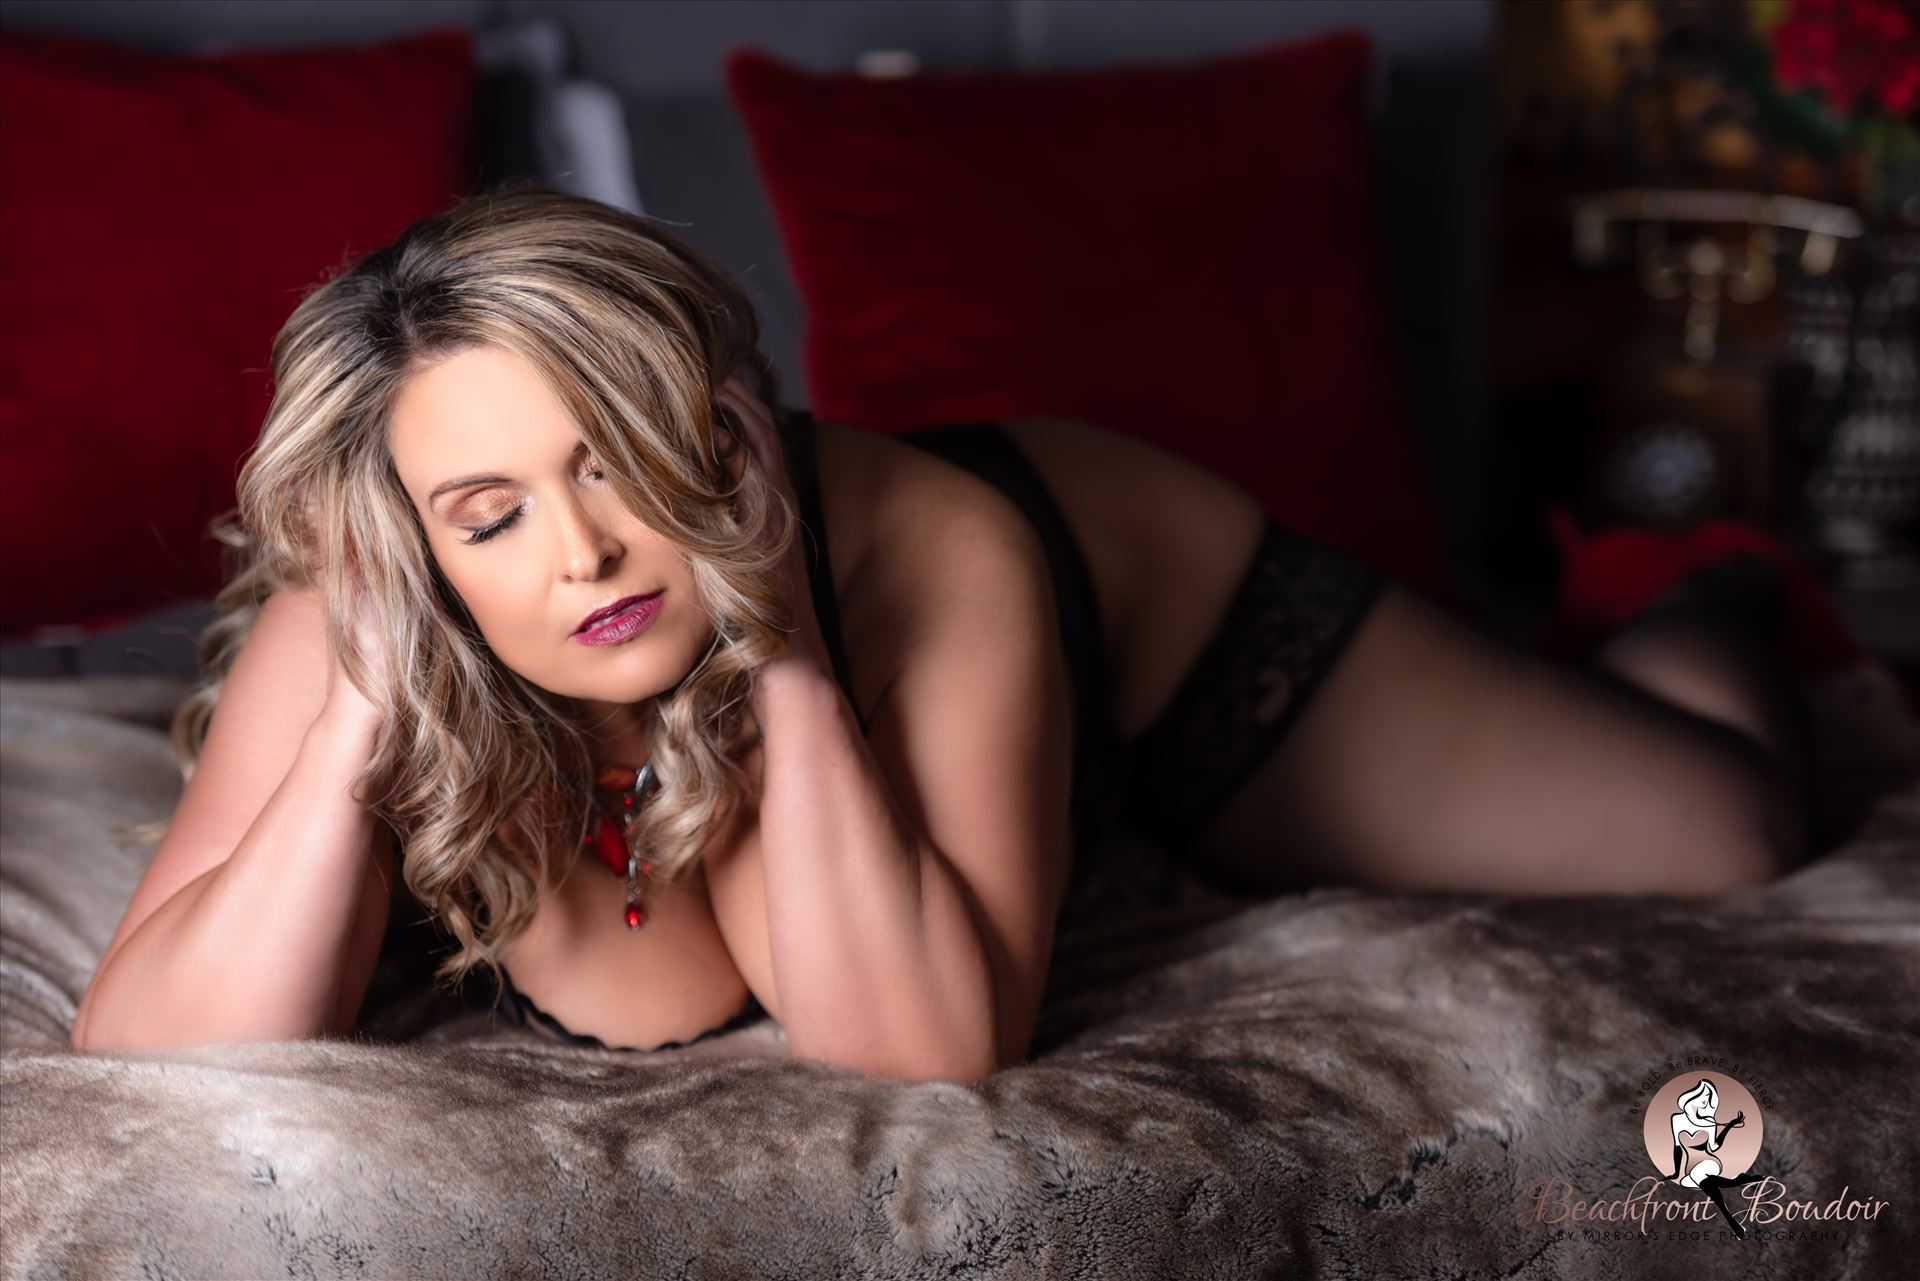 Port-2145.JPG Beachfront Boudoir by Mirror's Edge Photography is a Boutique Luxury Boudoir Photography Studio located just blocks from the beach in Oceano, California. My mission is to show as many women as possible how beautiful they truly are! by Sarah Williams